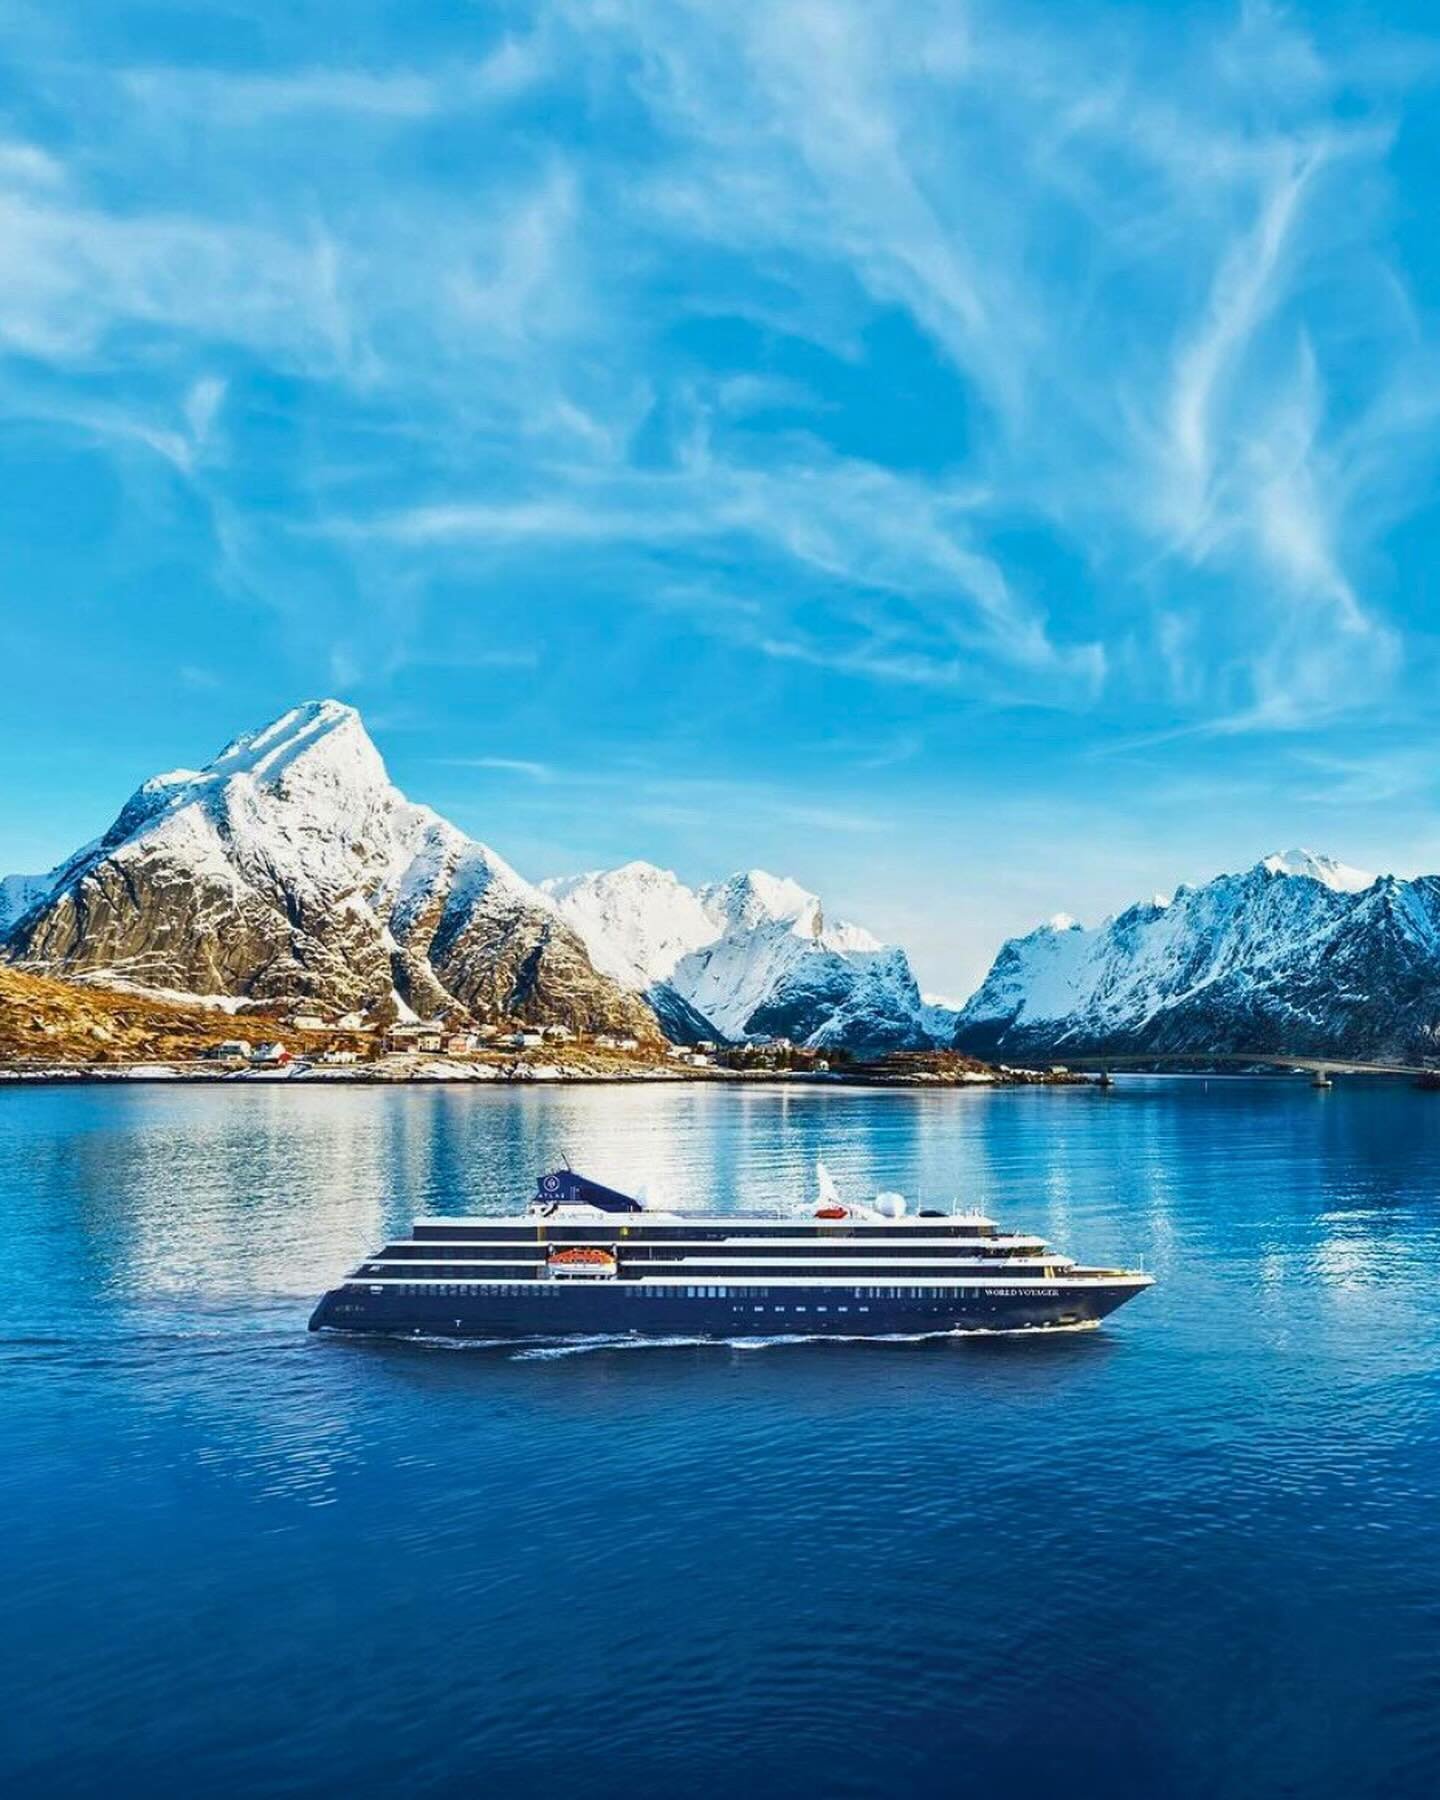 Cruise Special Alert! 🚨

@atlasoceanvoyages is offering a fabulous Adventure Beyond special at the moment:

⚡️ up to $5000 in savings 
⚡️ second guest sails free
⚡️ a complimentary cultural immersion experience!

Atlas Ocean Voyages is a relative ne